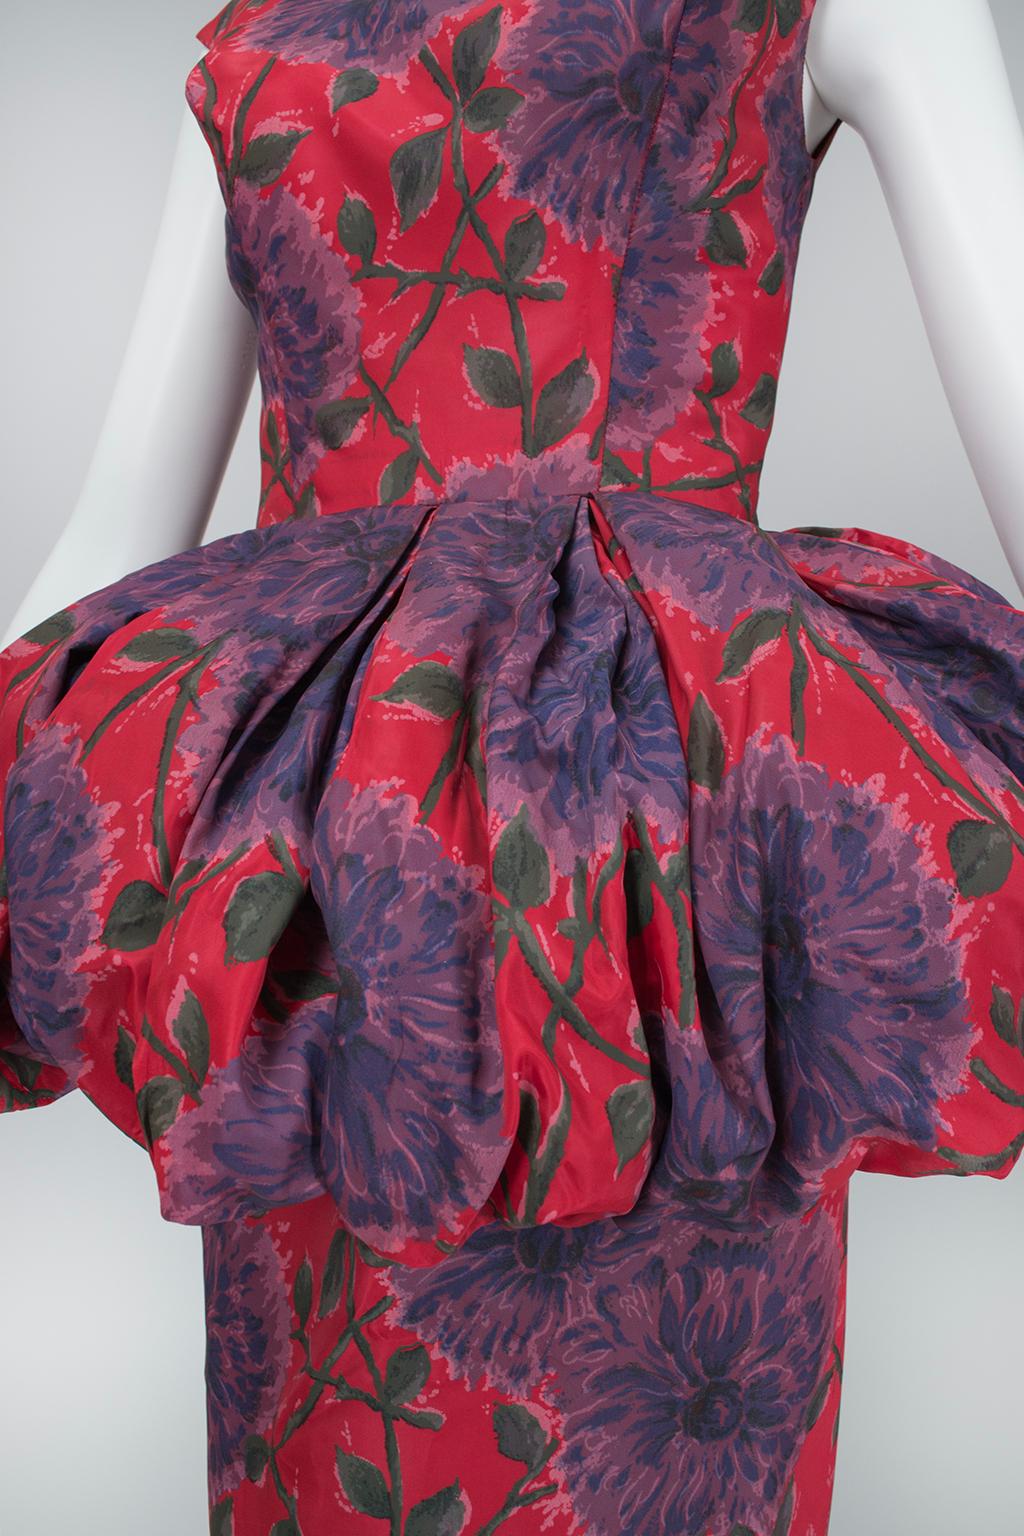 Red and Purple Sheath Dress w 360-Degree Tulle Farthingale Peplum - M, 1960s In Excellent Condition For Sale In Tucson, AZ